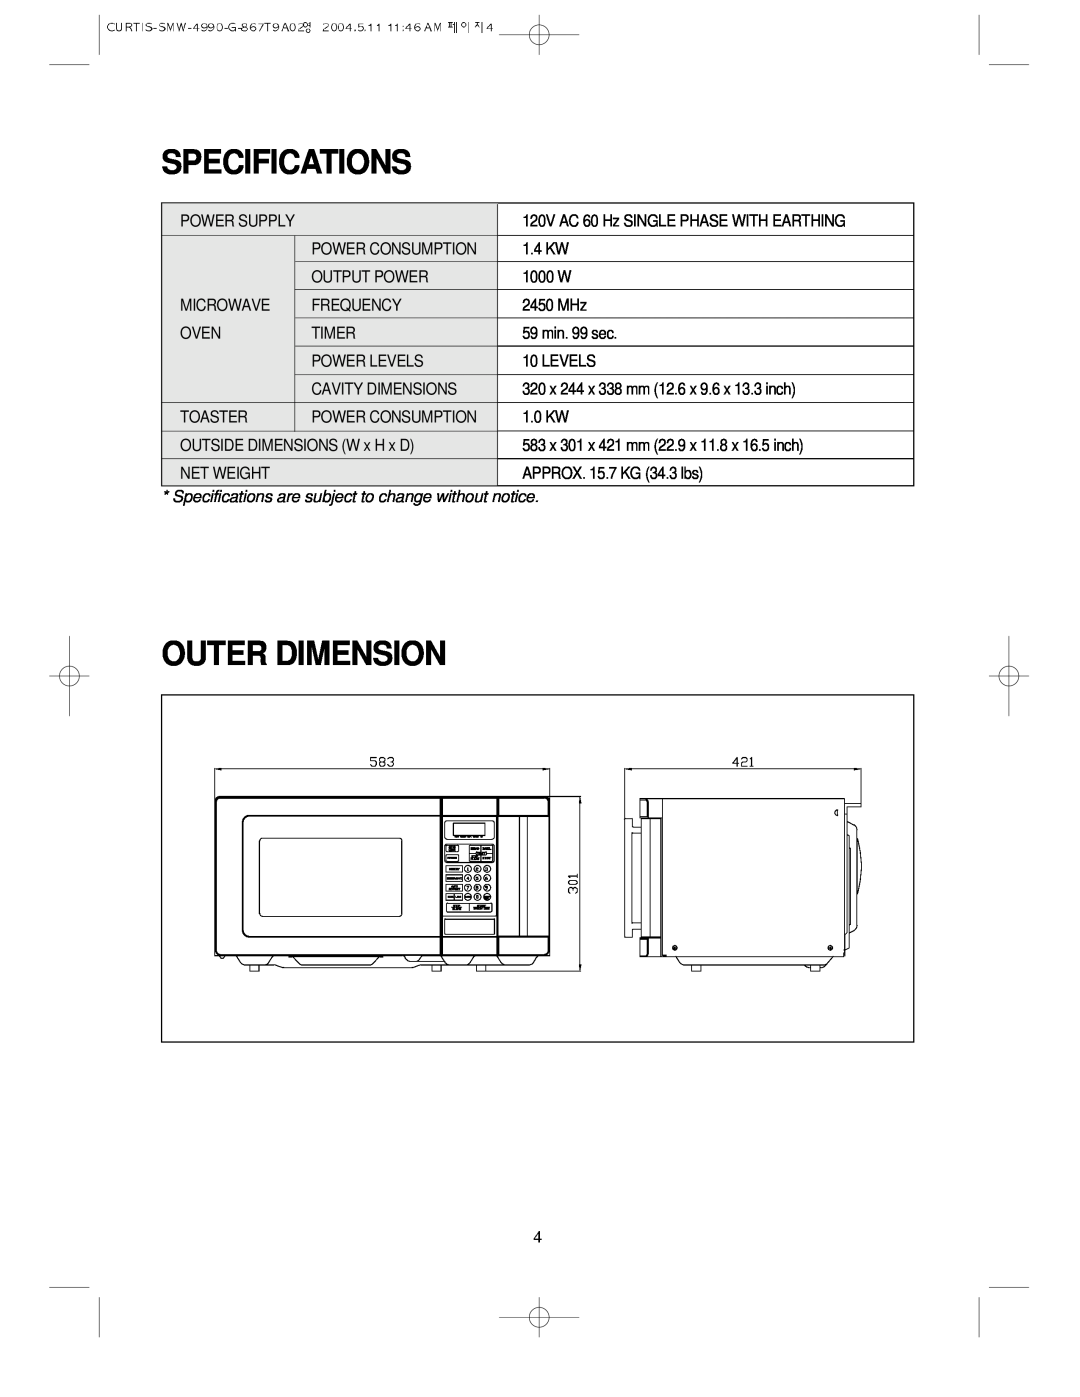 Sunbeam SMW-4990 manual Specifications, Outer Dimension 